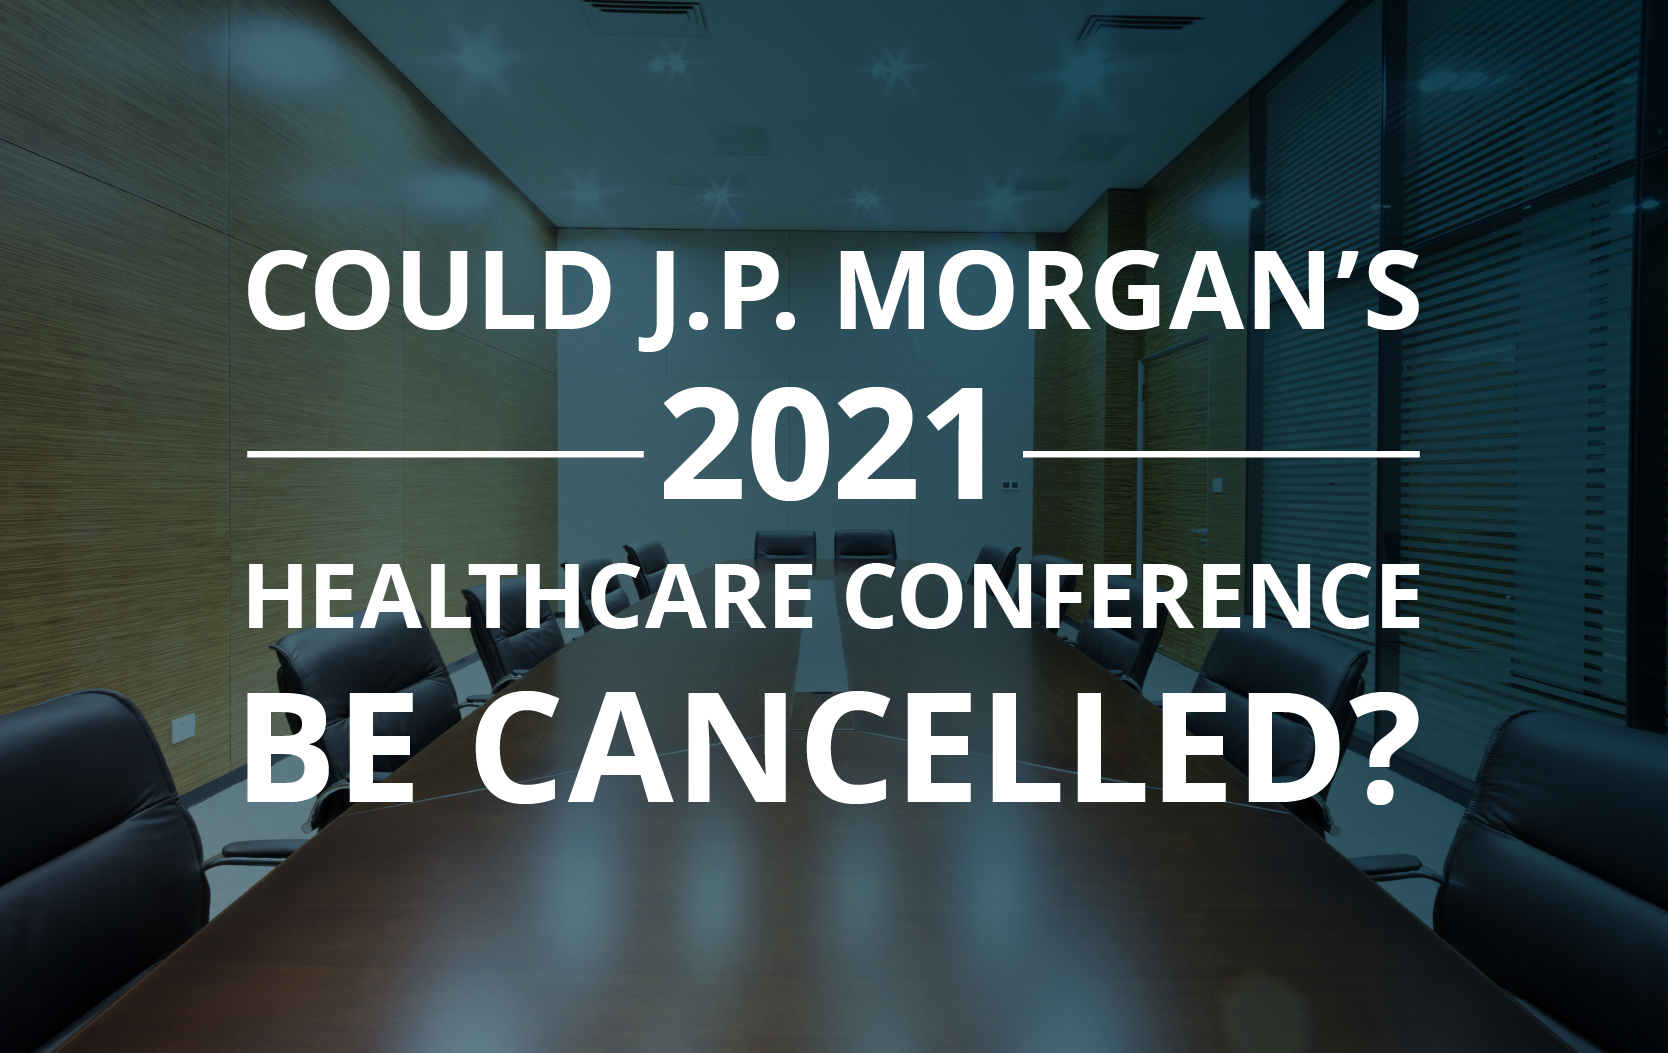 image for Could J.P. Morgan’s 2021 Healthcare Conference Be Cancelled?